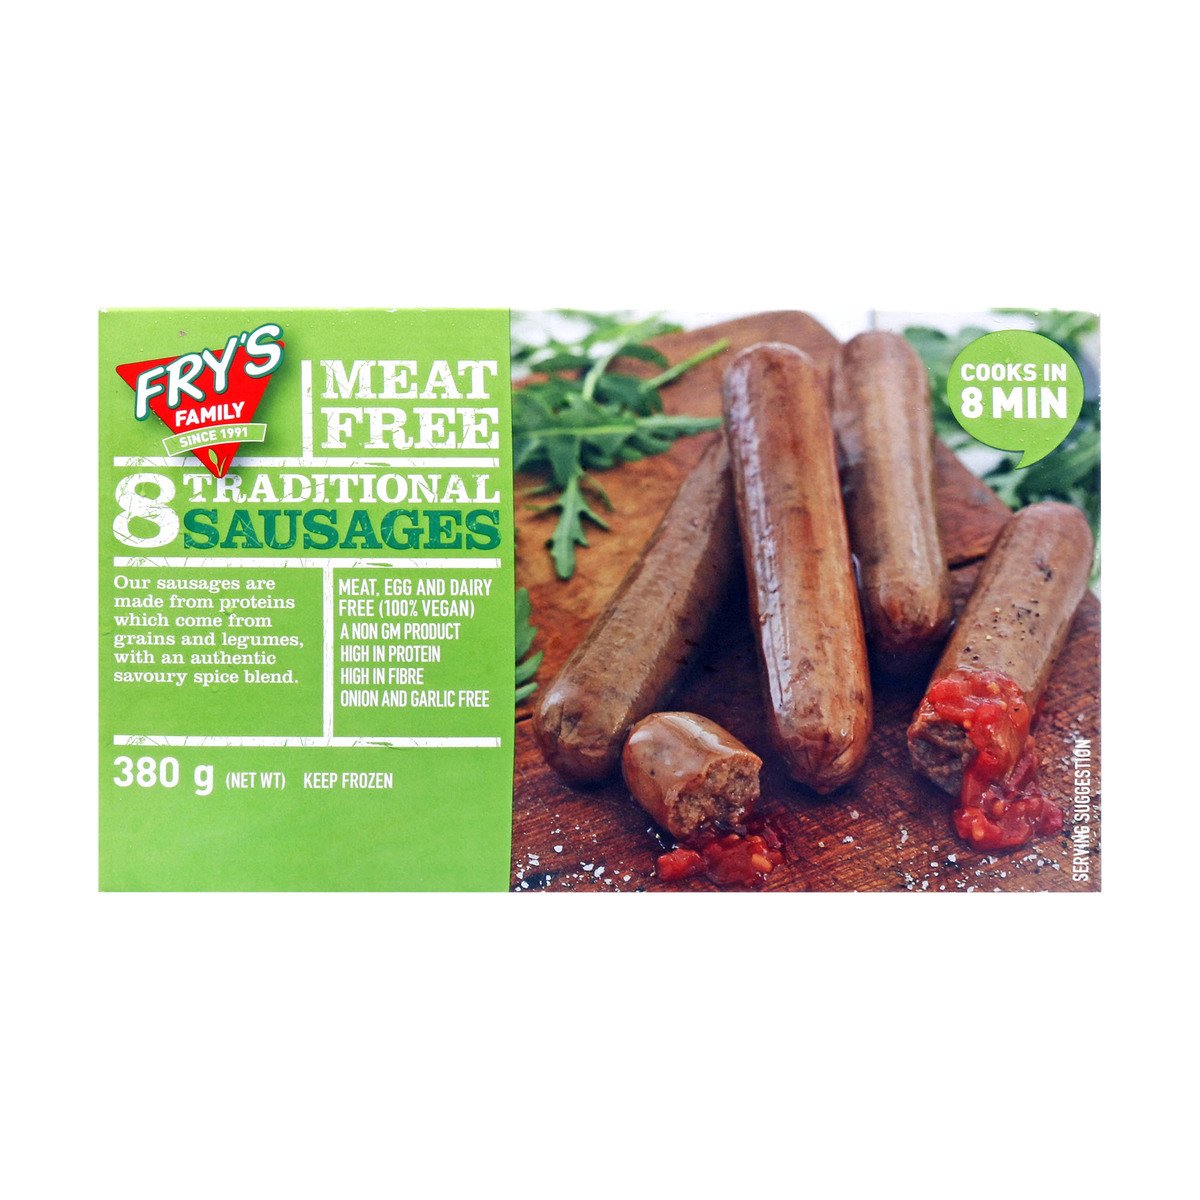 Fry's Family Meat Free 8 Traditional Sausages 380 g